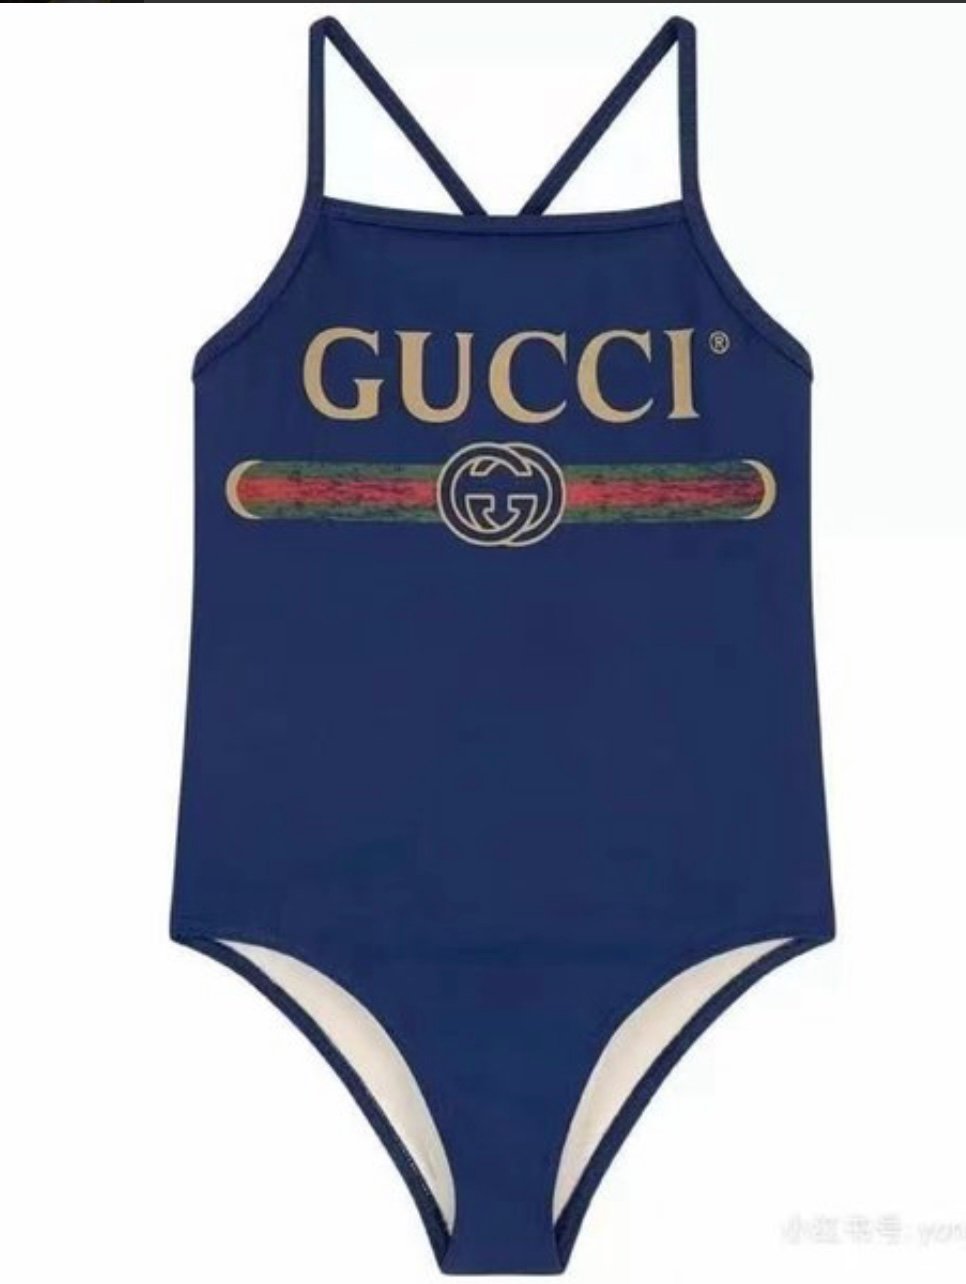 Gg bathing suit  ShopBambinaBoutique